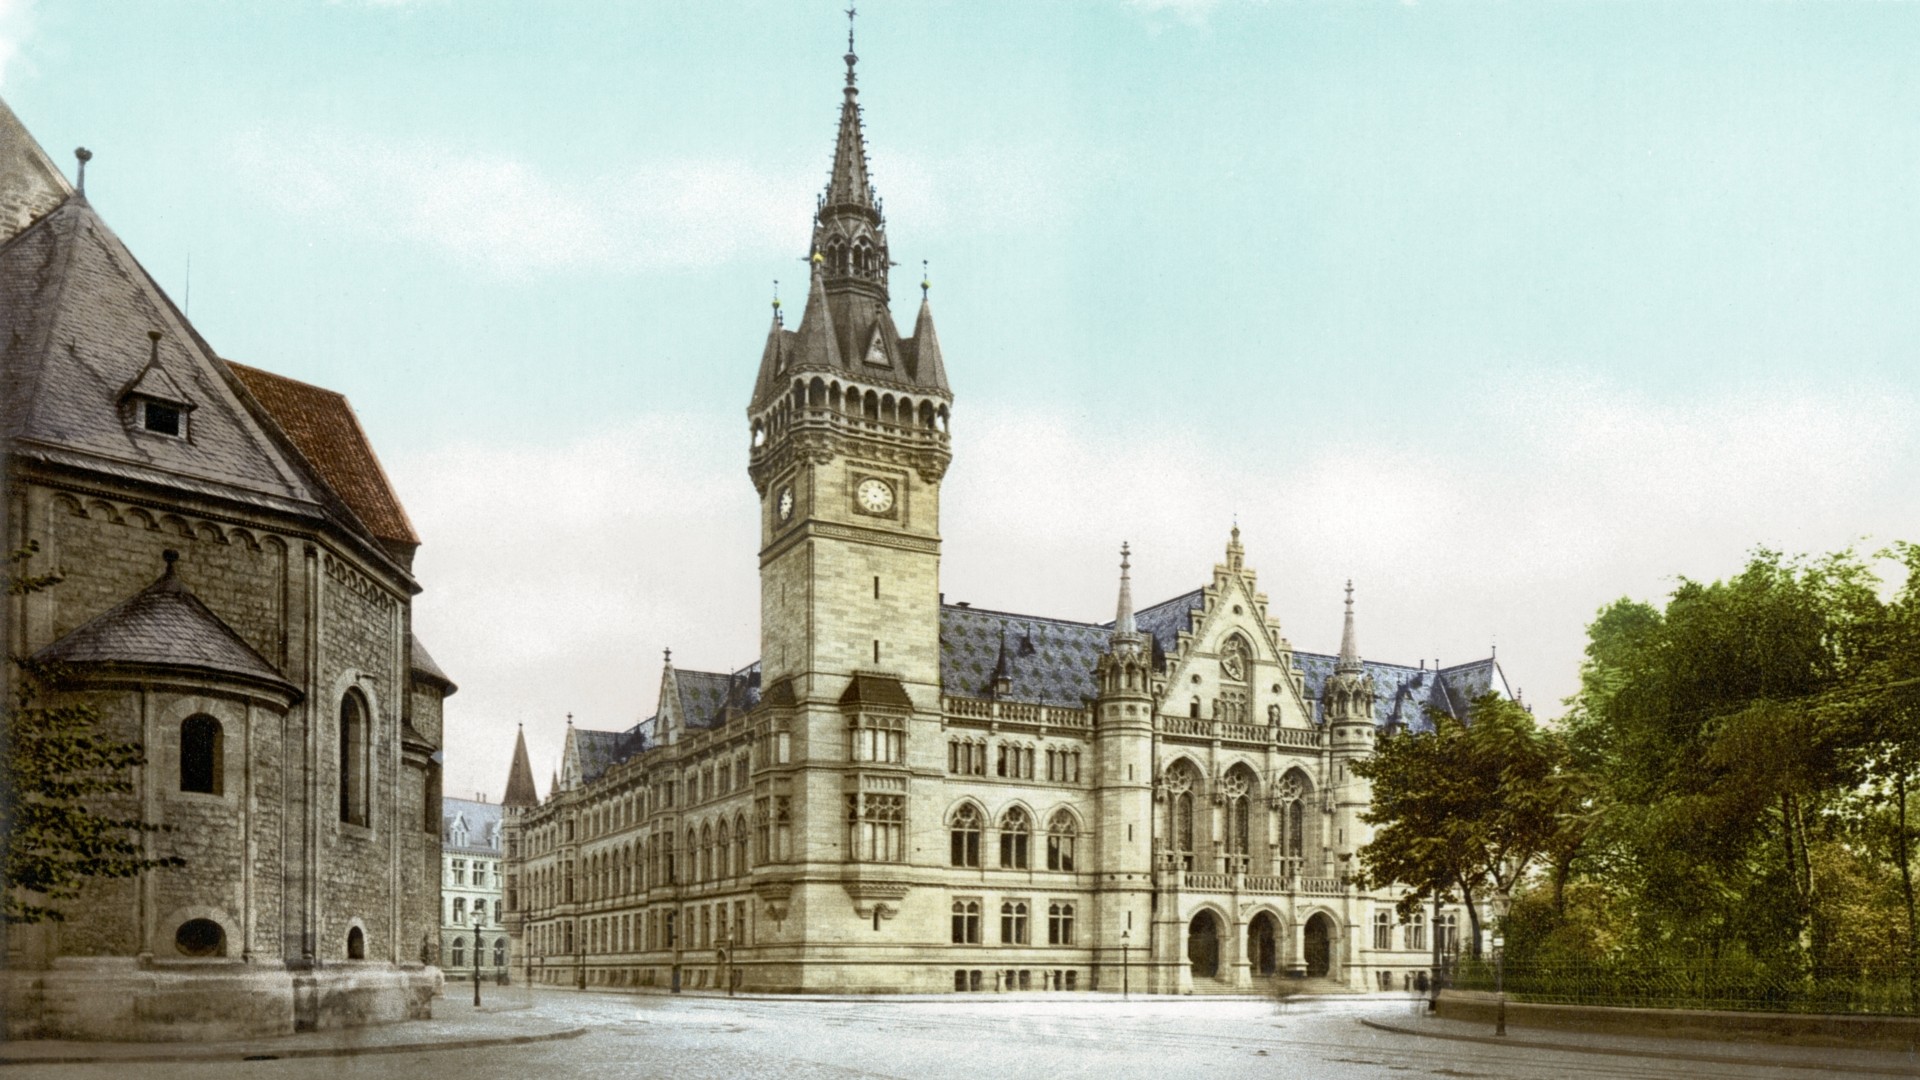 General 1920x1080 architecture building castle clouds tower trees city Germany church colorized photos history old town square empty  old photos